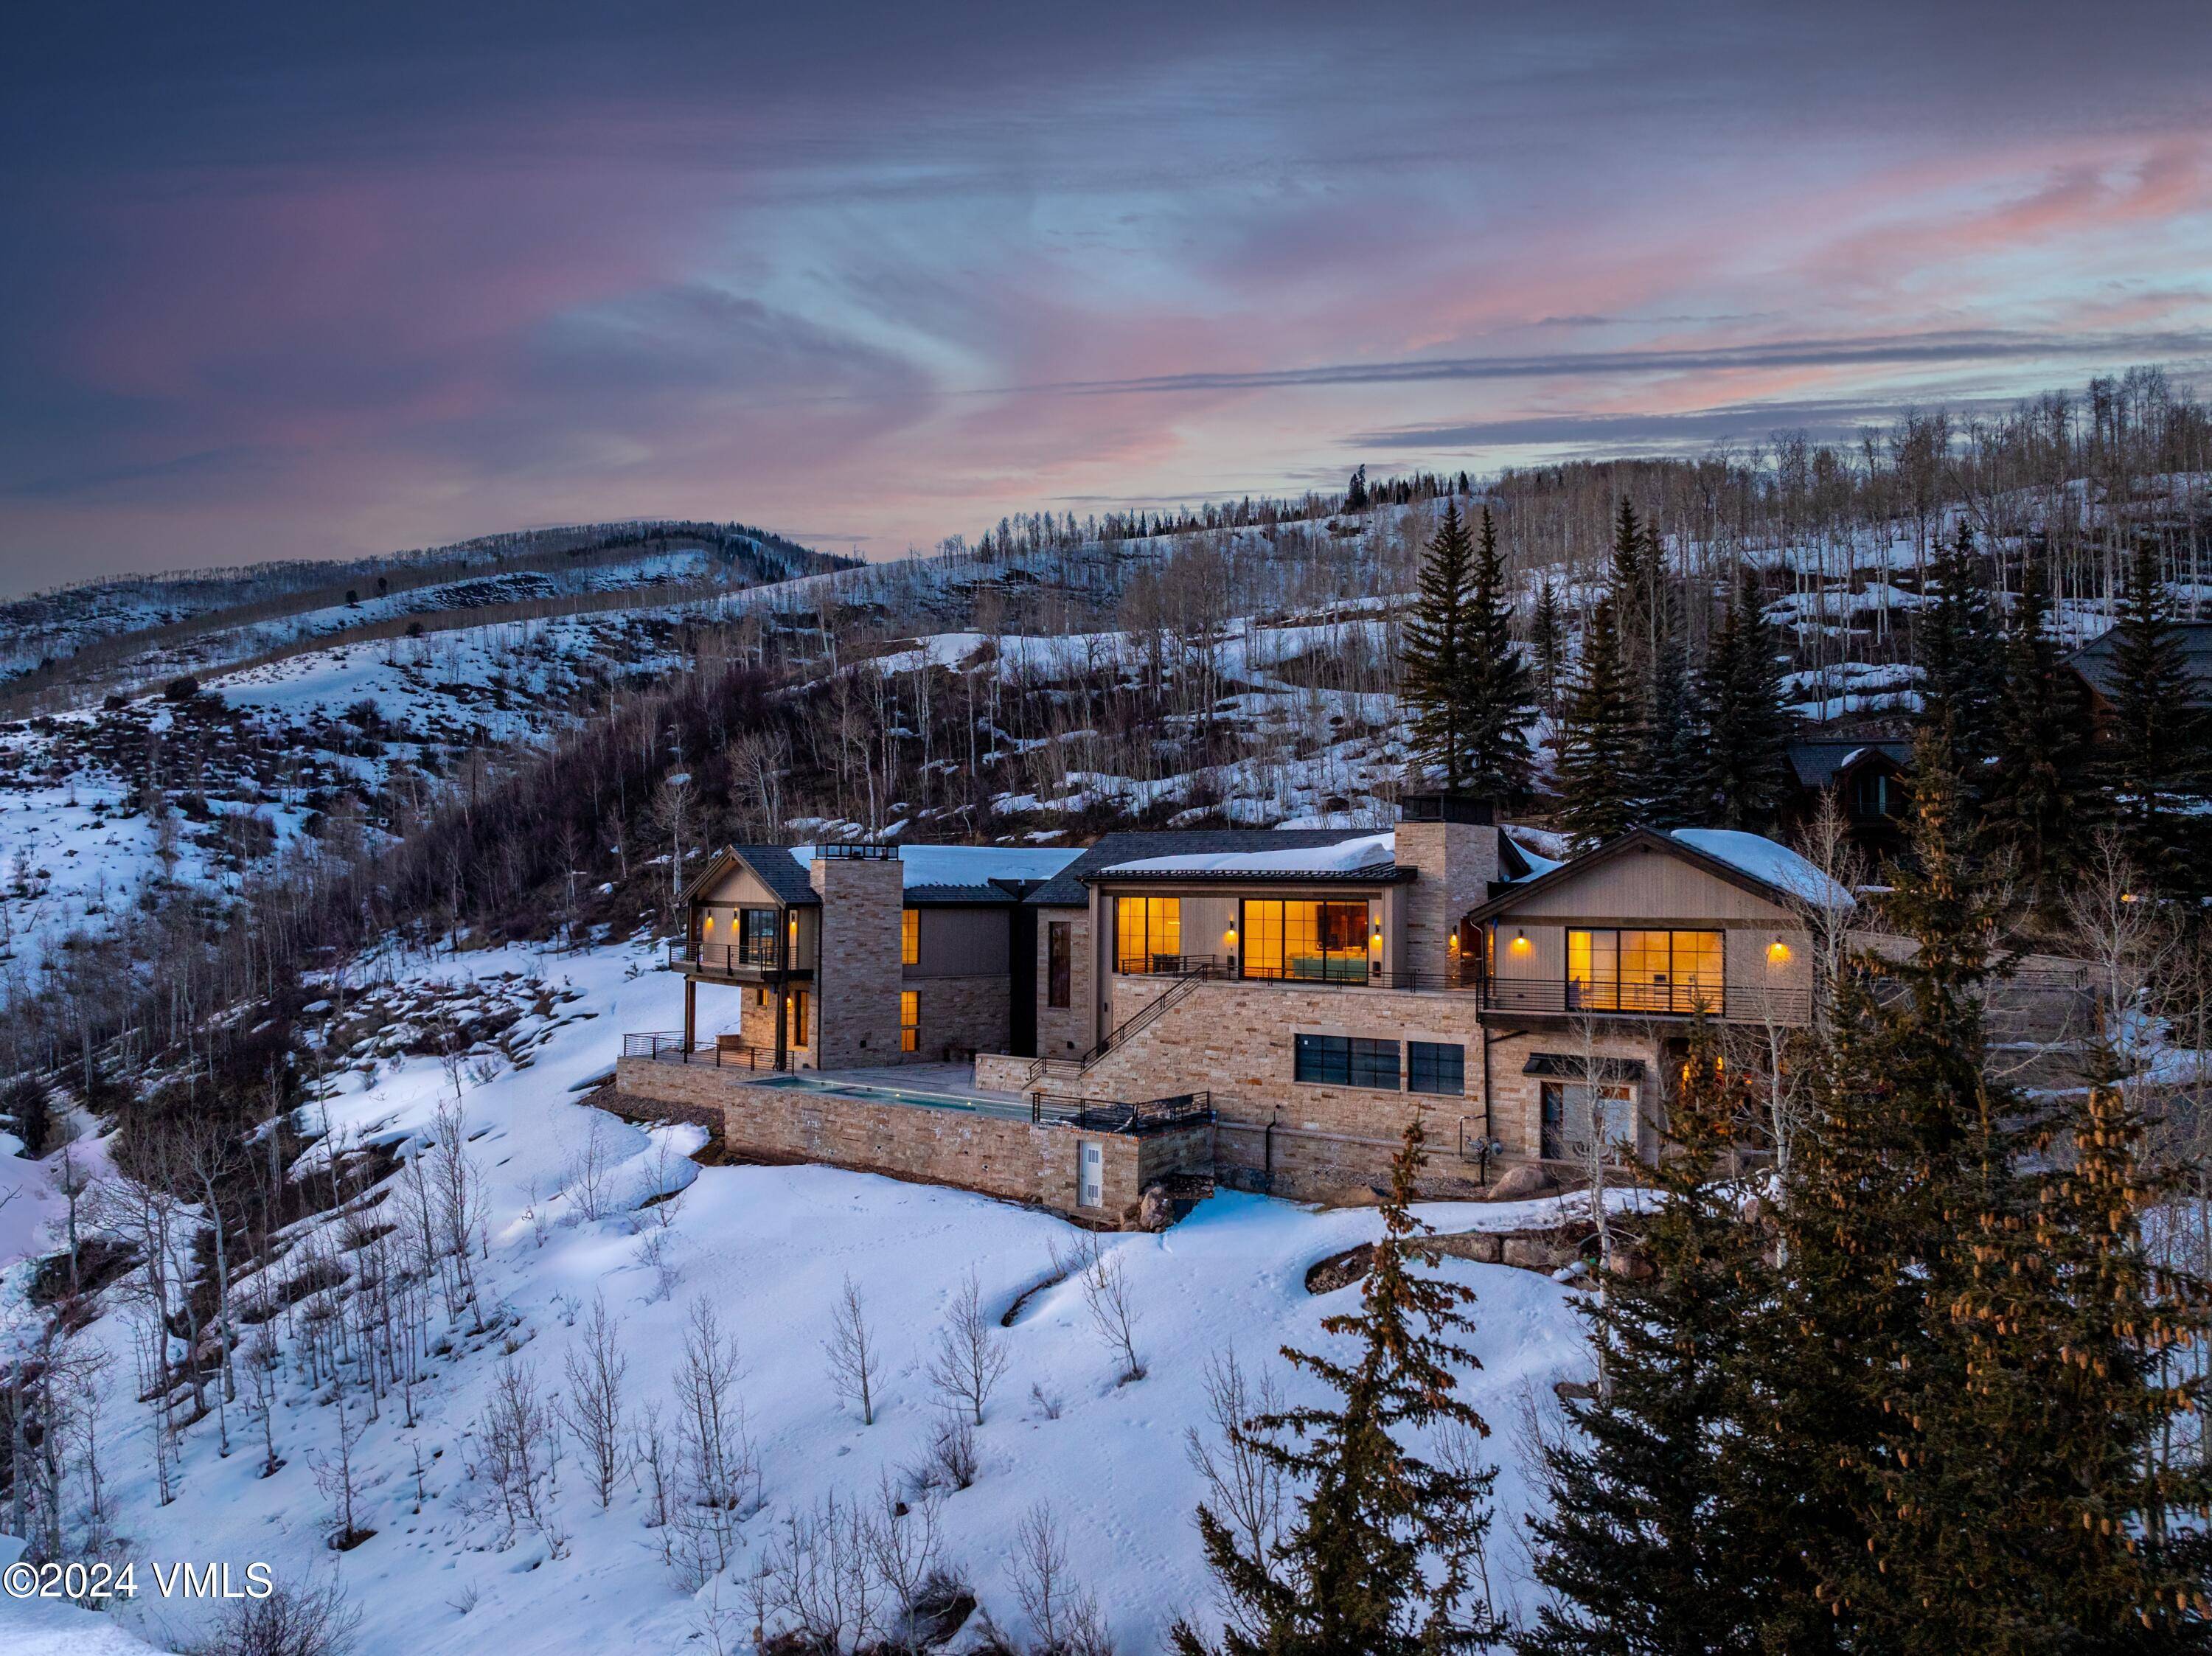 Perched at the top of Spraddle Creek Estates on over 6 acres stands Vail's newest and most spectacular custom home, offering the most remarkable views of Vail Mountain.